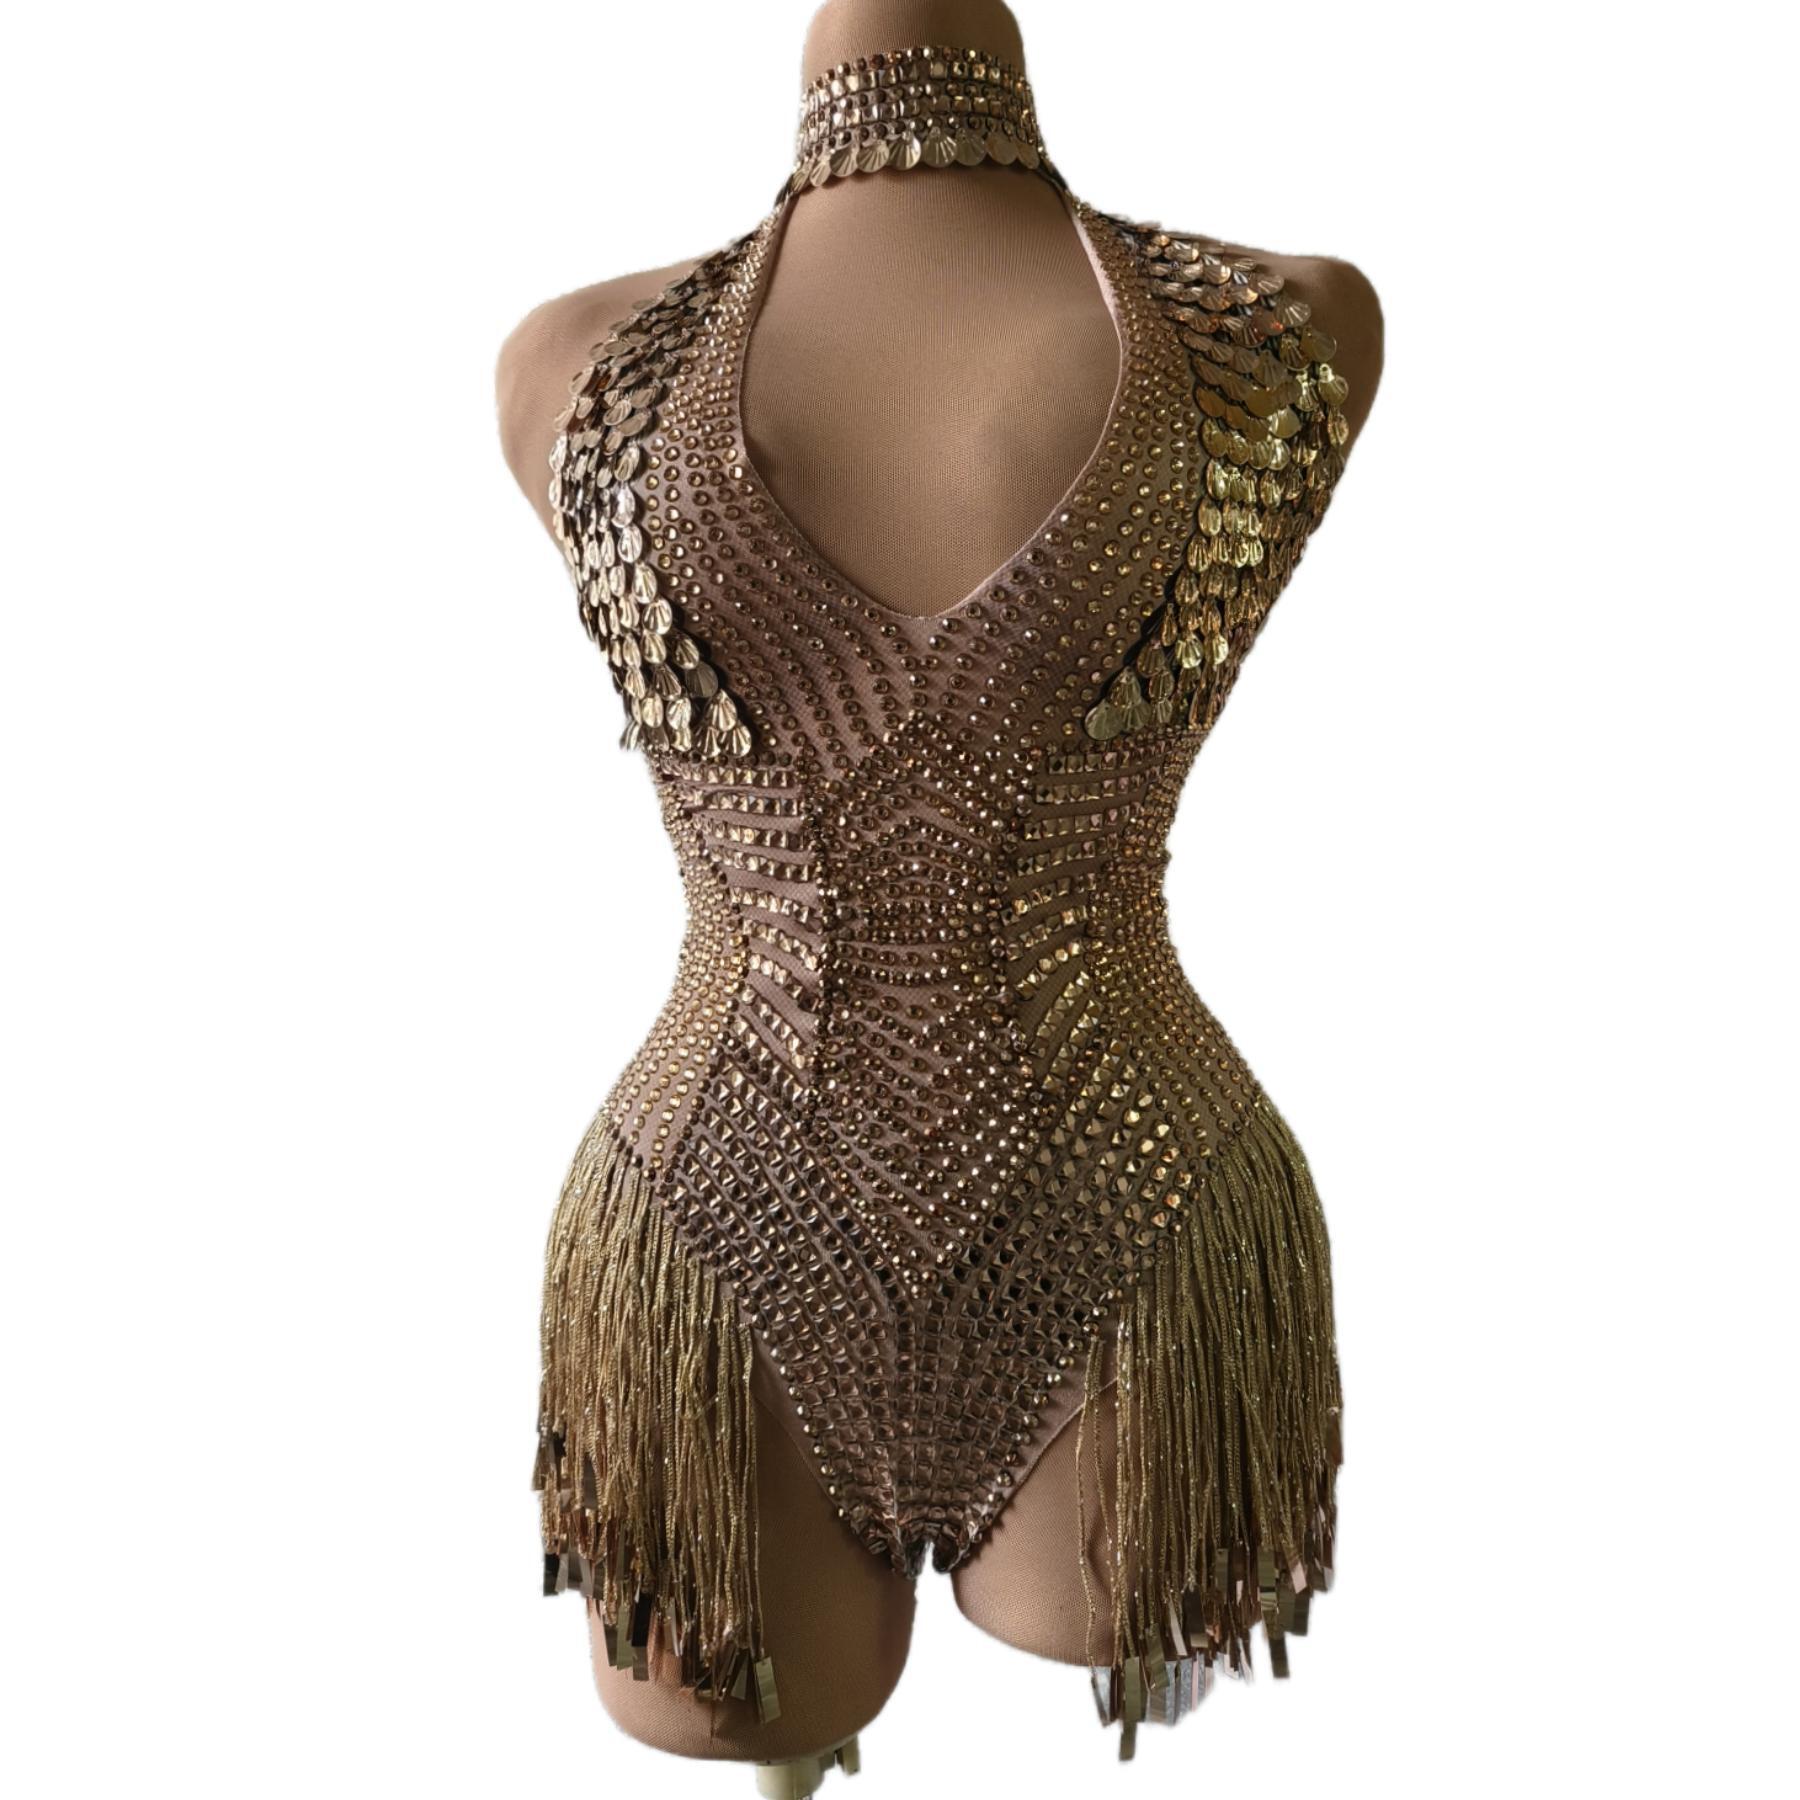 Gorgeous Rhinestones Bodysuit for Woman Dance Show Sleeveless Costume Evening Birthday Party Outfit Sequin Fringe Leotard